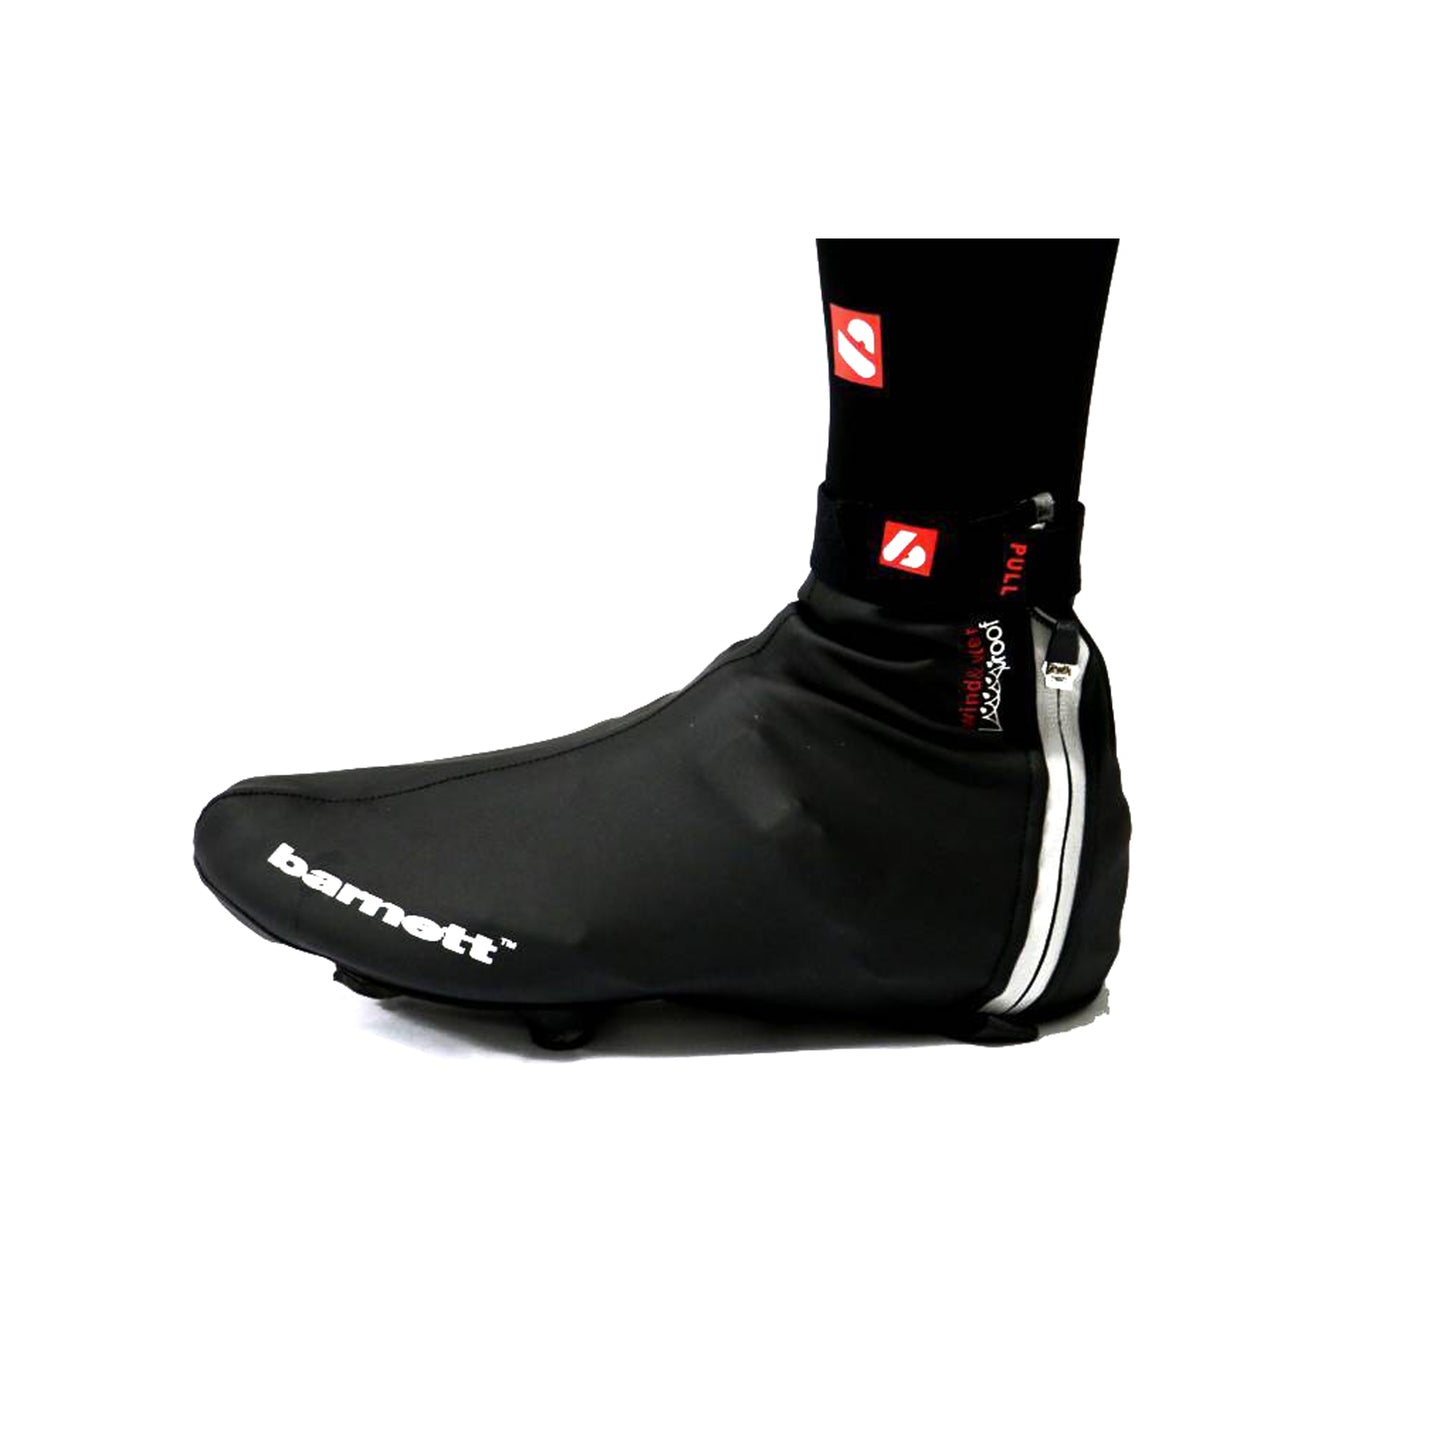 BSP-05 Cycling overshoes, Warm and water-repellent, Black